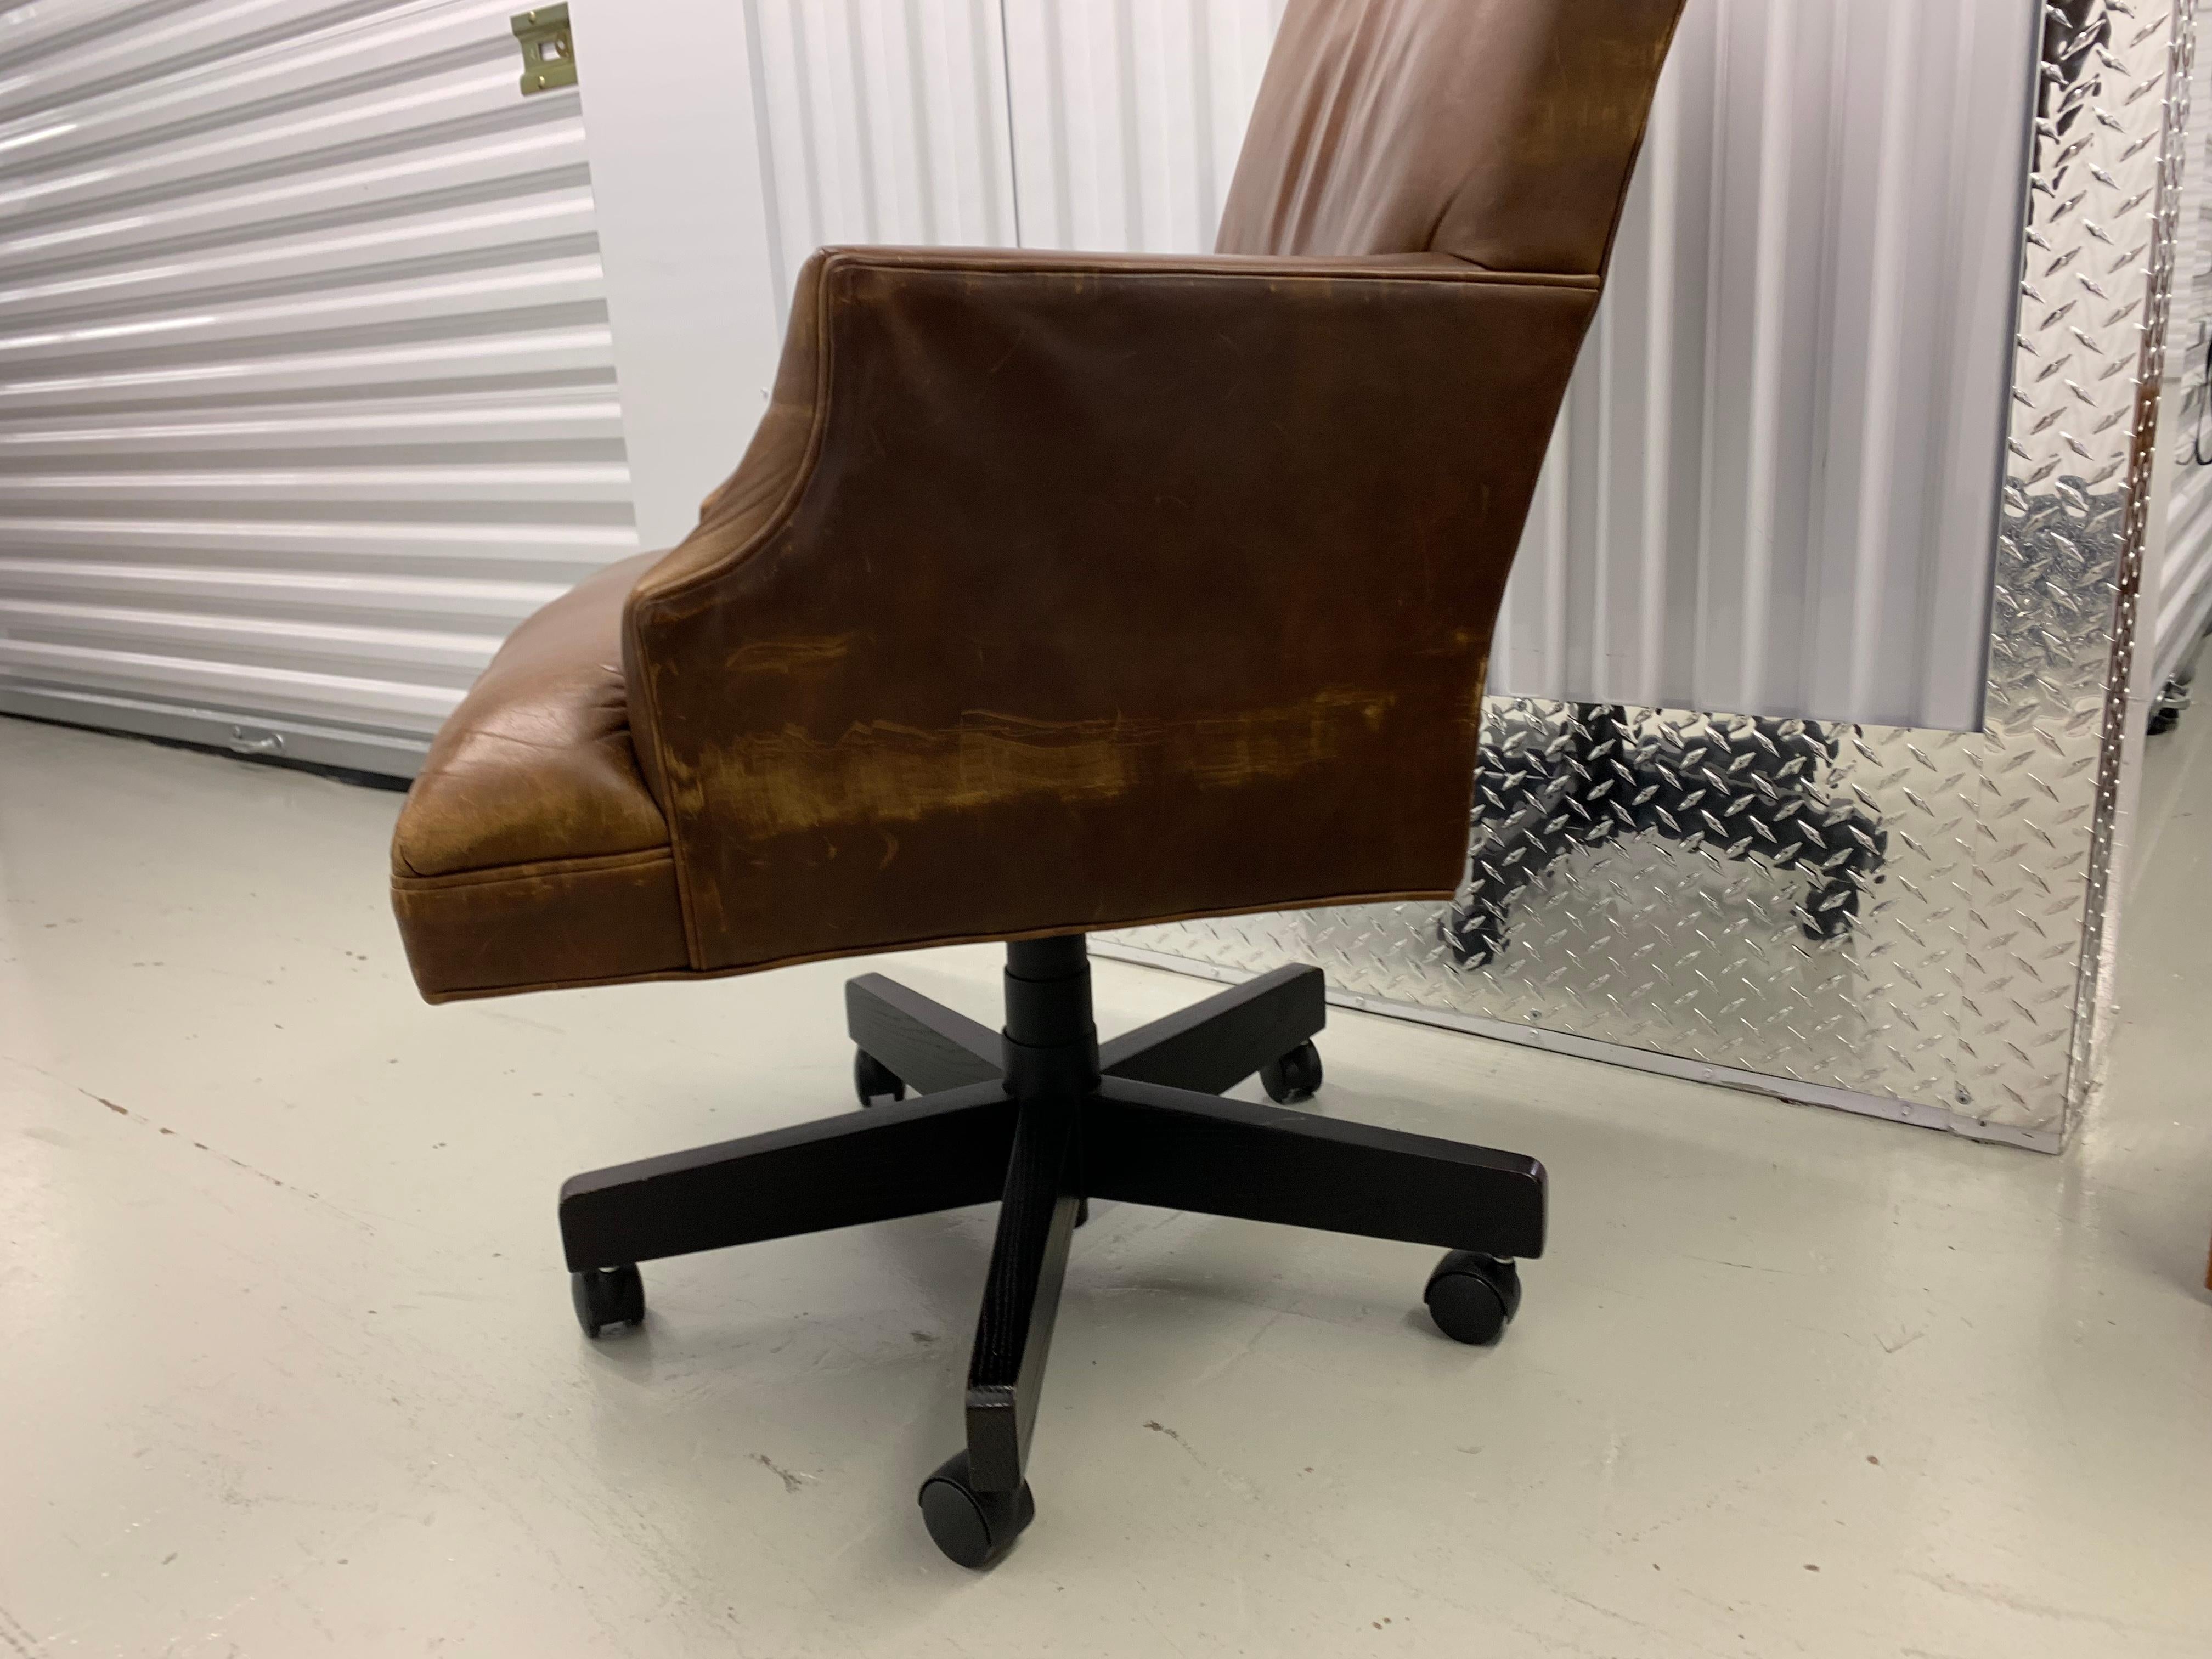 Belgian Classic leather armchair,
5 star base with rolling casters, 
adjustable seat

Soft leather with a comfy, lived in patina
great for your office or library.